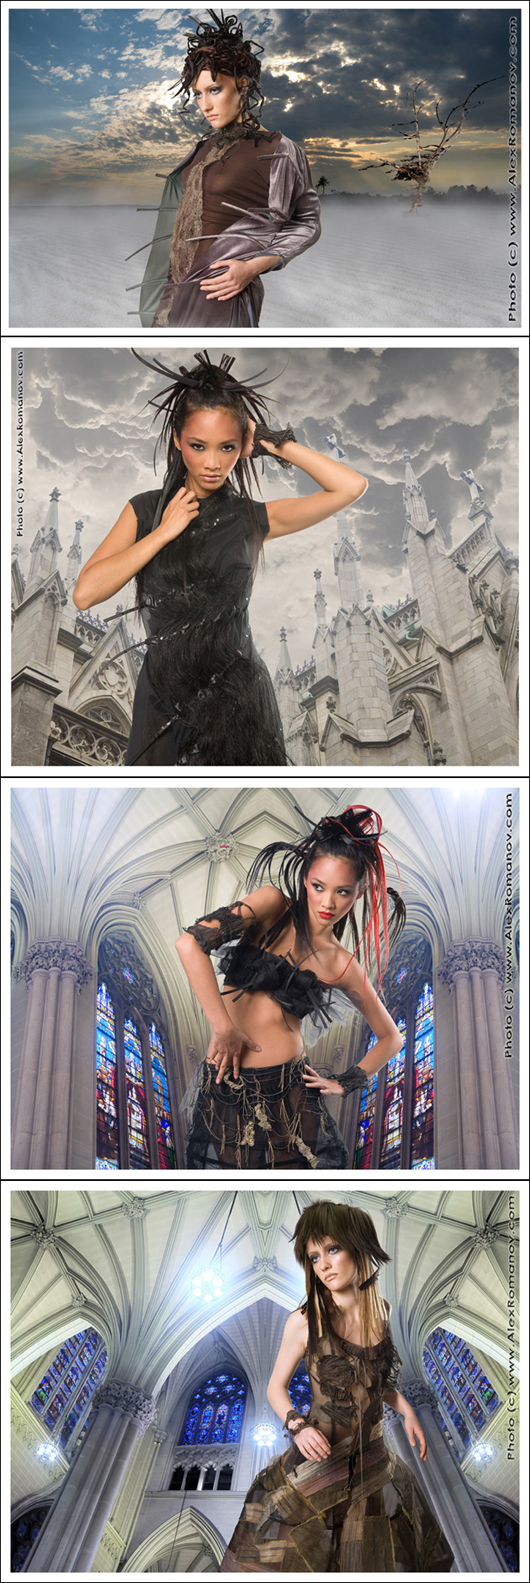 Male and Female model photo shoot of Alex Romanov, Liiratai and Su zie in NYC-Saint Patrick's Cathedral, hair styled by Irina Cher, makeup by Jordana David